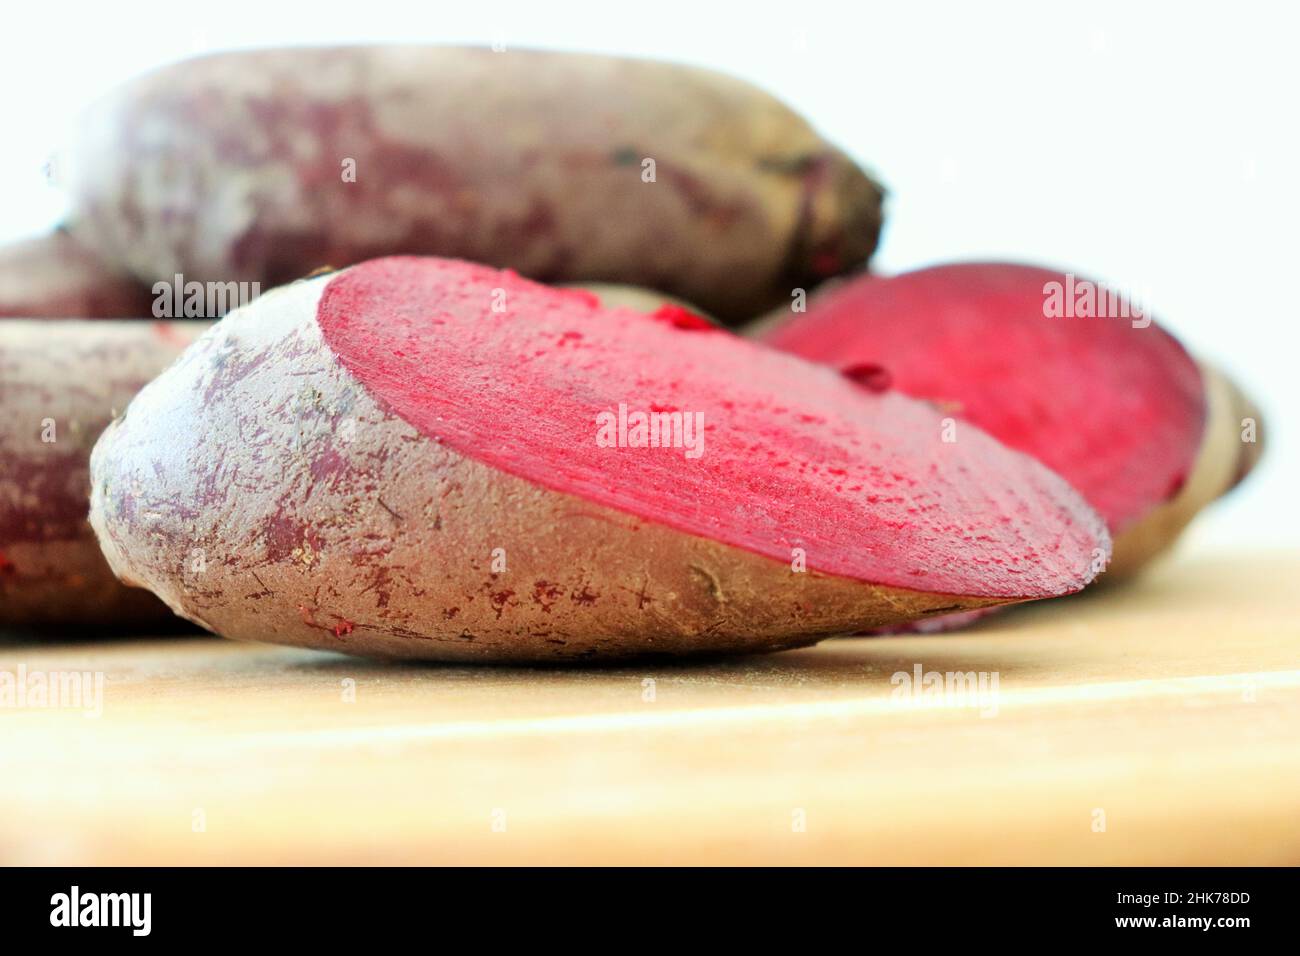 Red beet or beetroot on the wooden table. Stock Photo